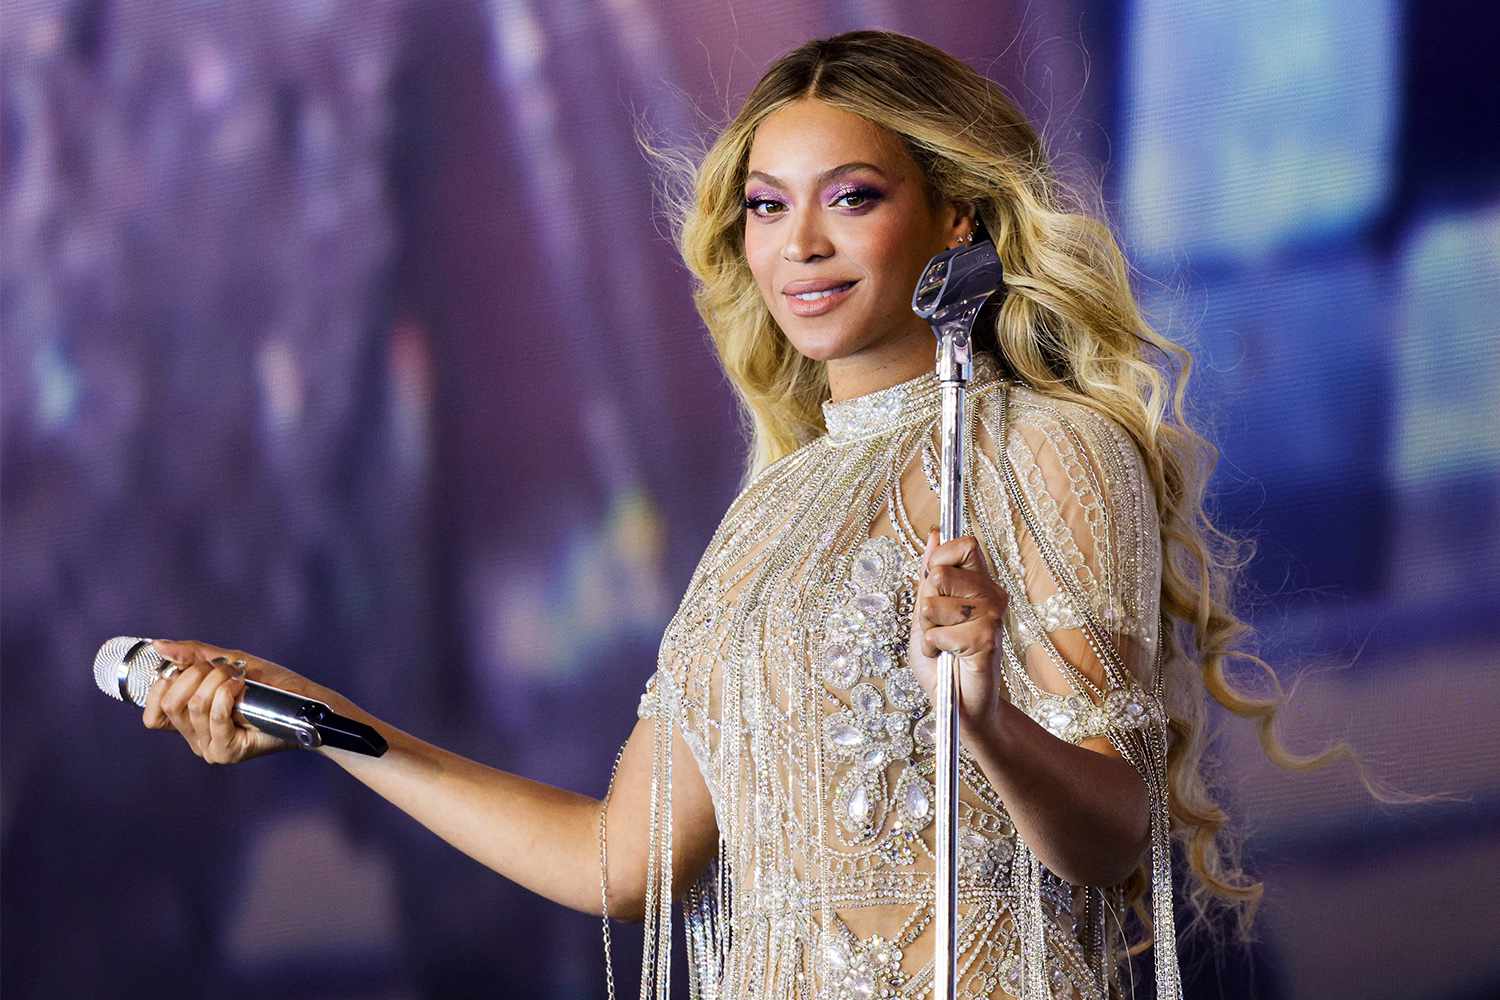 beyonce-rocks-platinum-blonde-hair-and-silvery-outfit-amidst-controversy